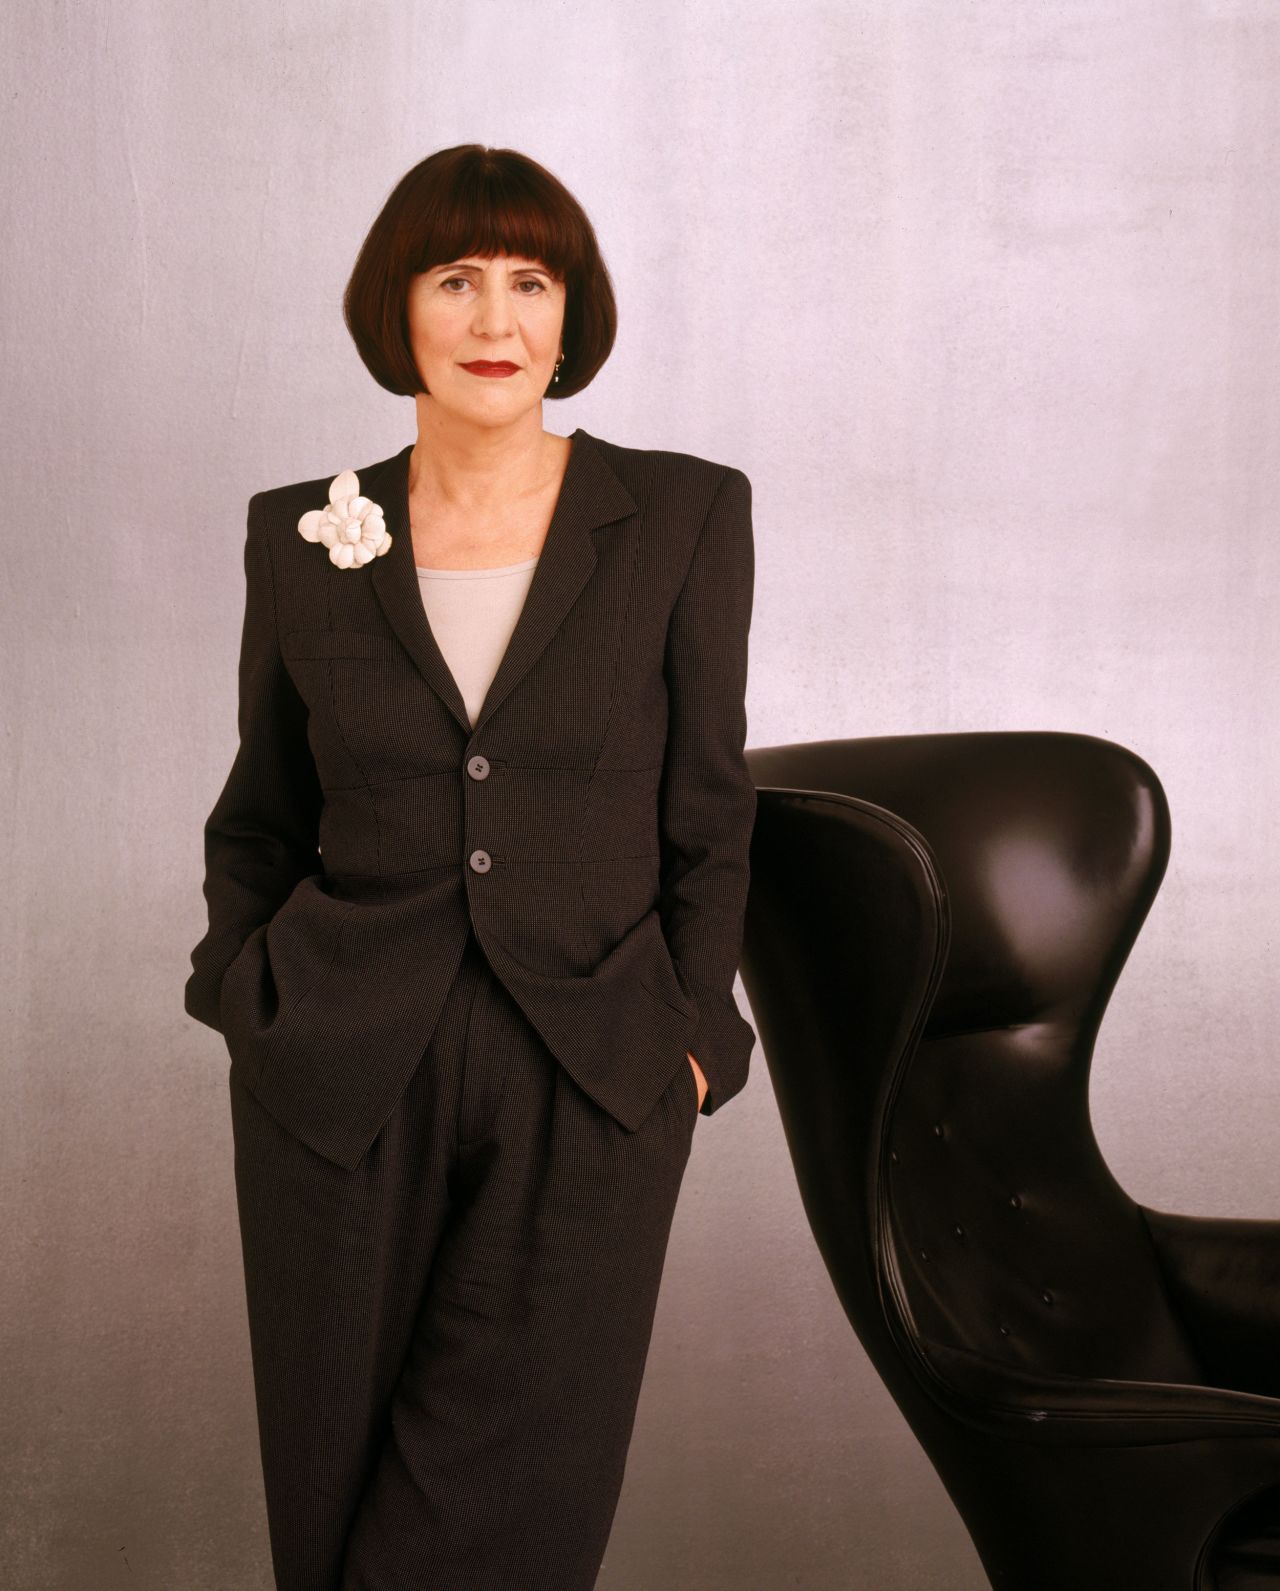 Elsa Klensch, who was among the first to bring fashion to TV screens with CNN's 